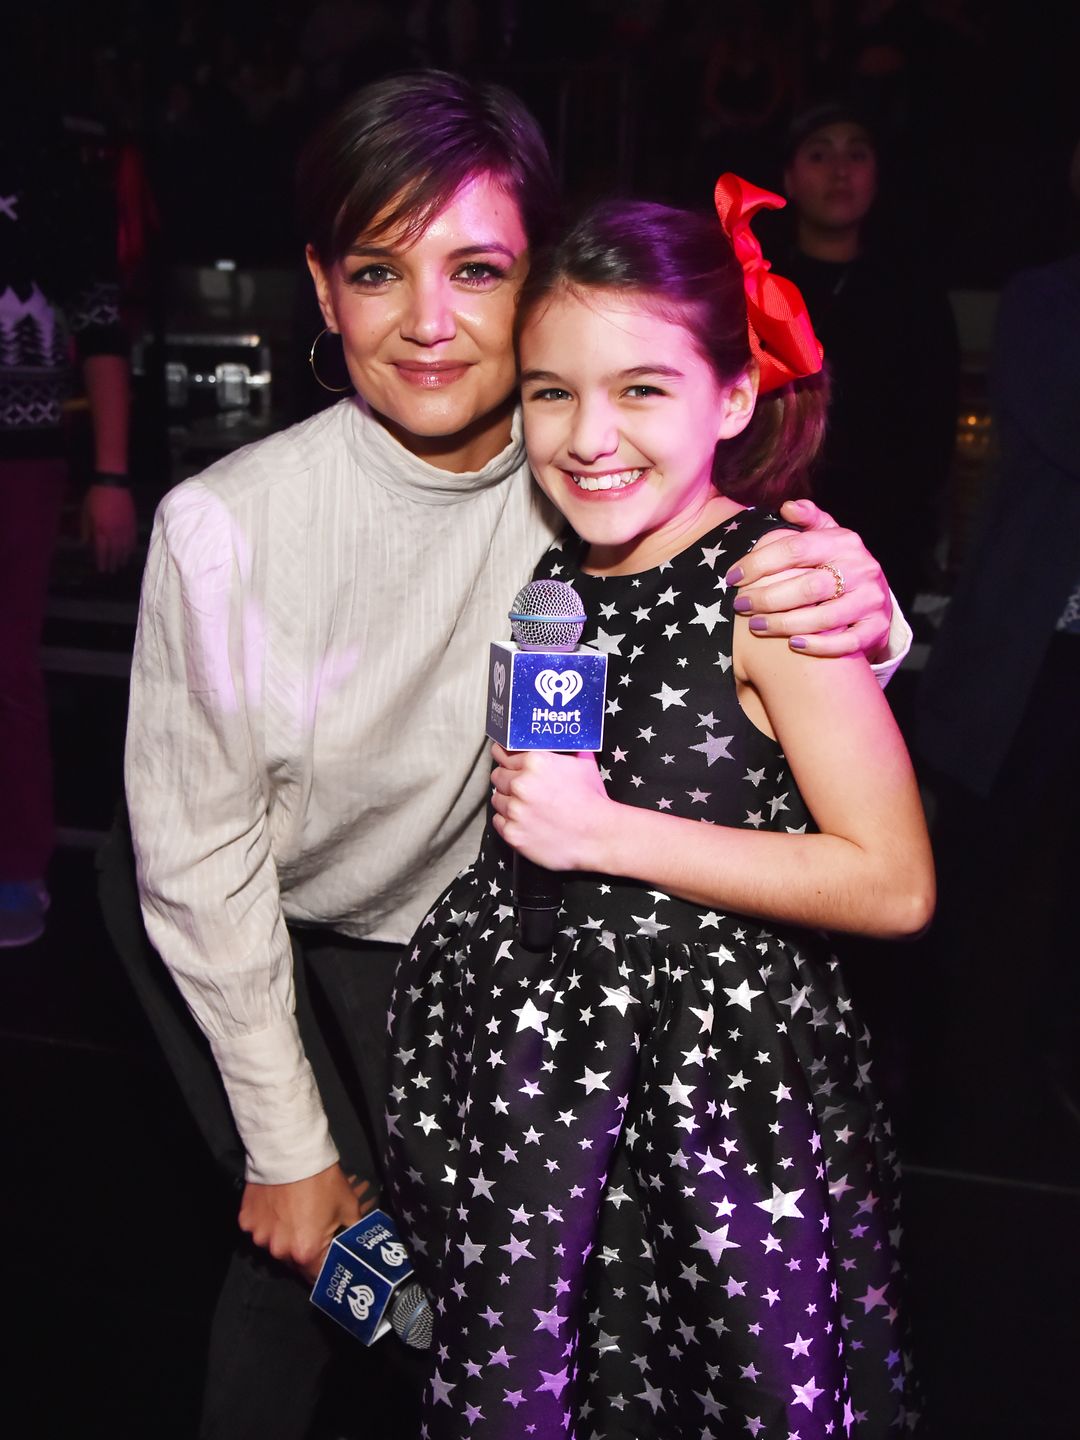  mother and daughter at jingle ball 